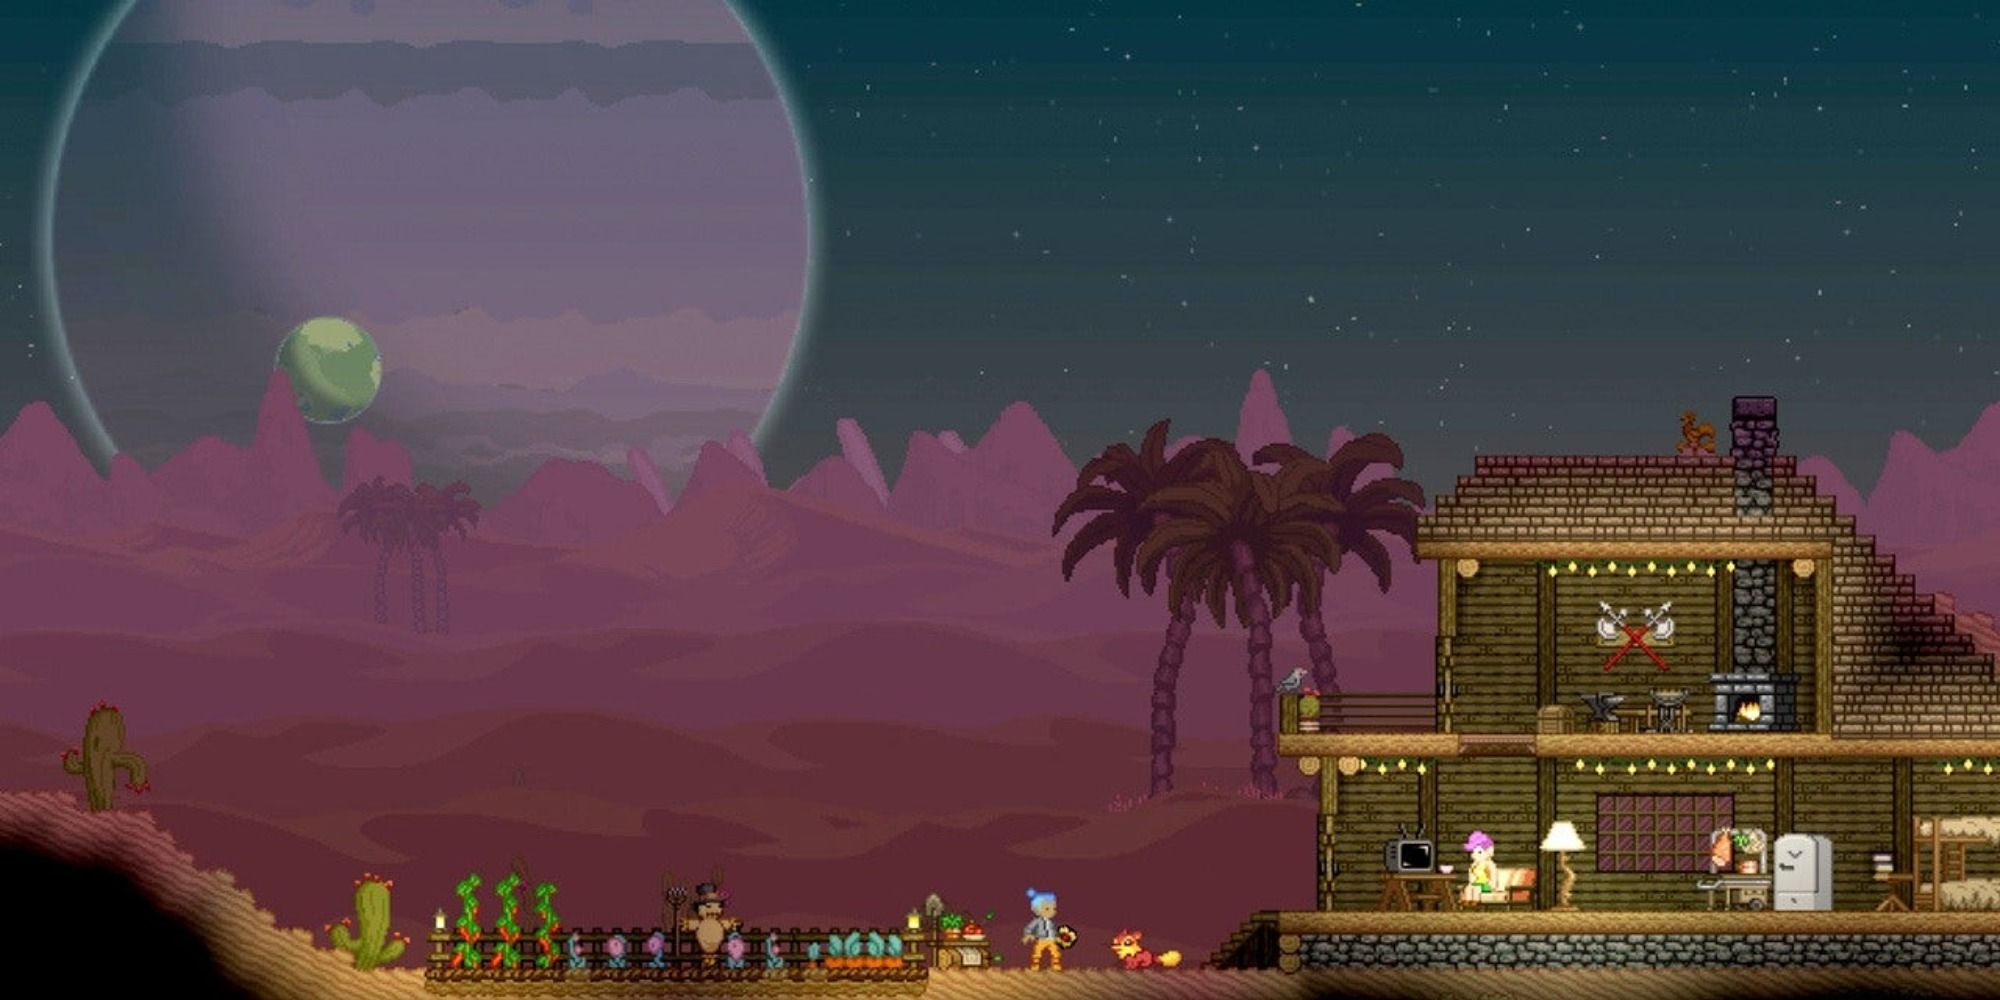 Player encounters peaceful and cozy settlement on a planet in Starbound